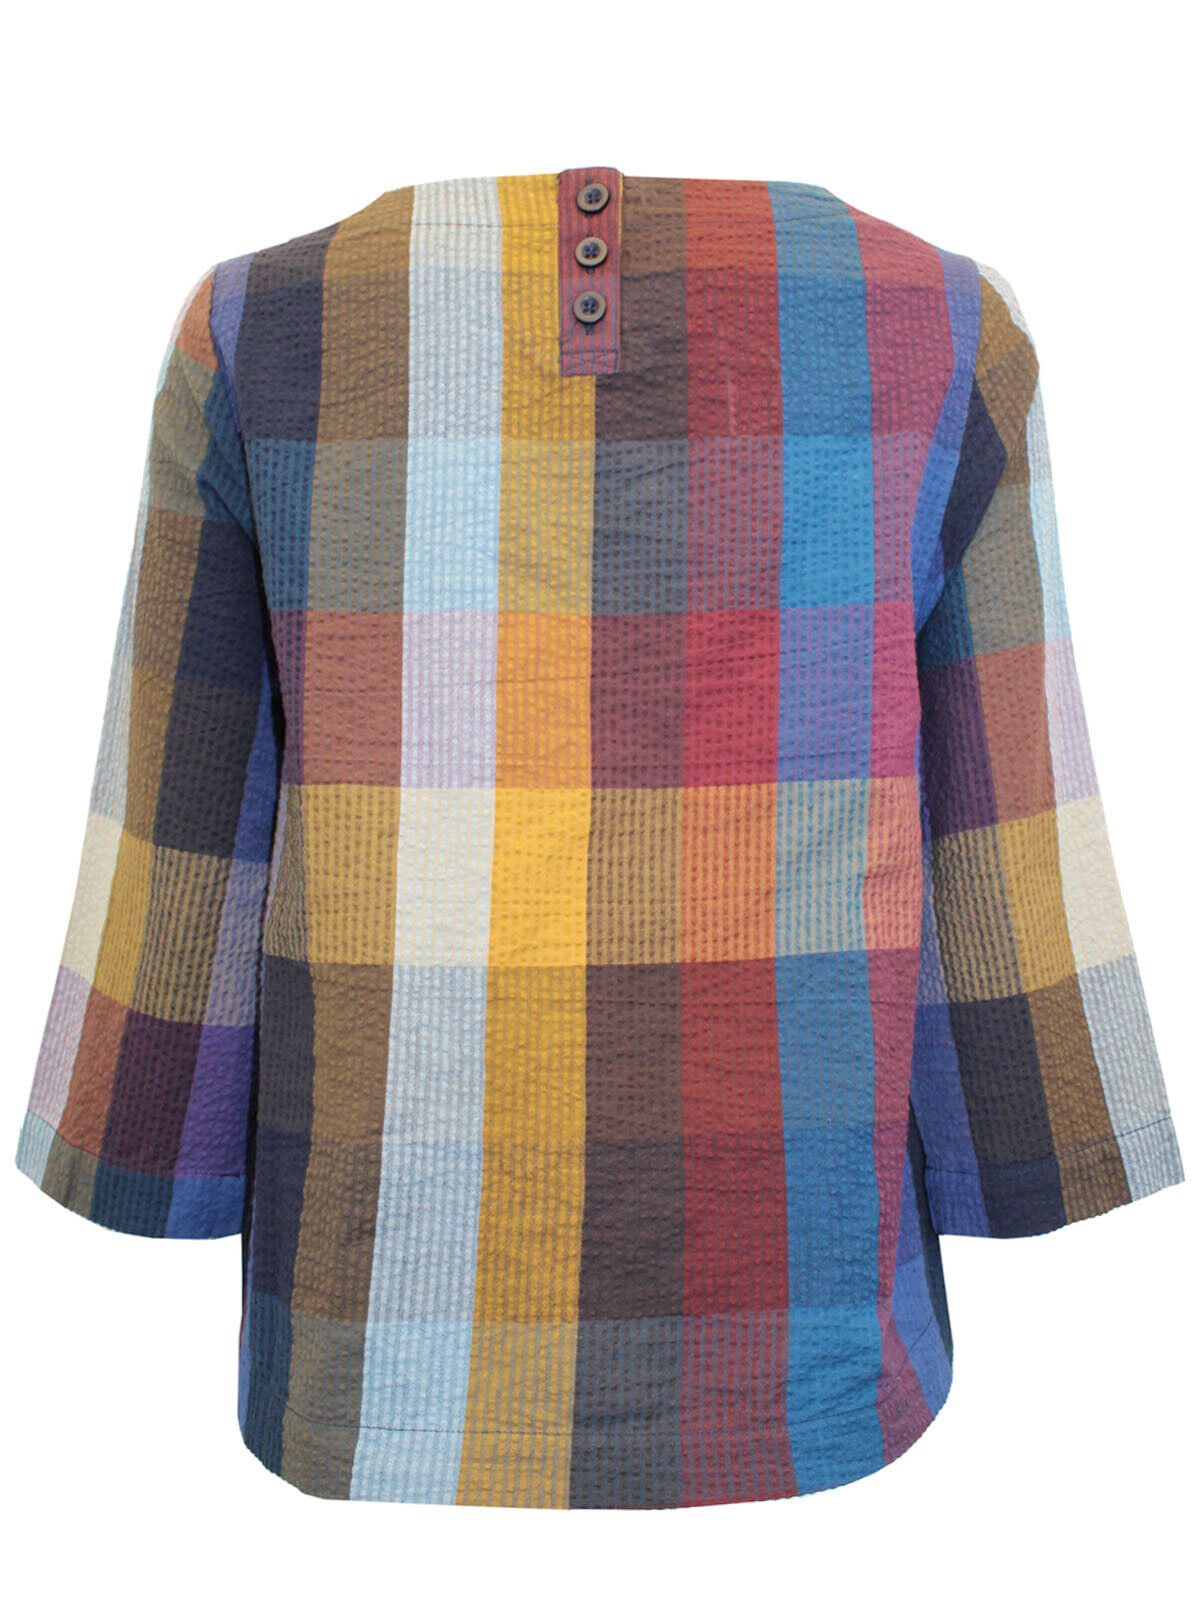 EX Seasalt Pure Cotton Checked Stipple Shore Top Sizes 10, 14, 18, 22 RRP £52.95